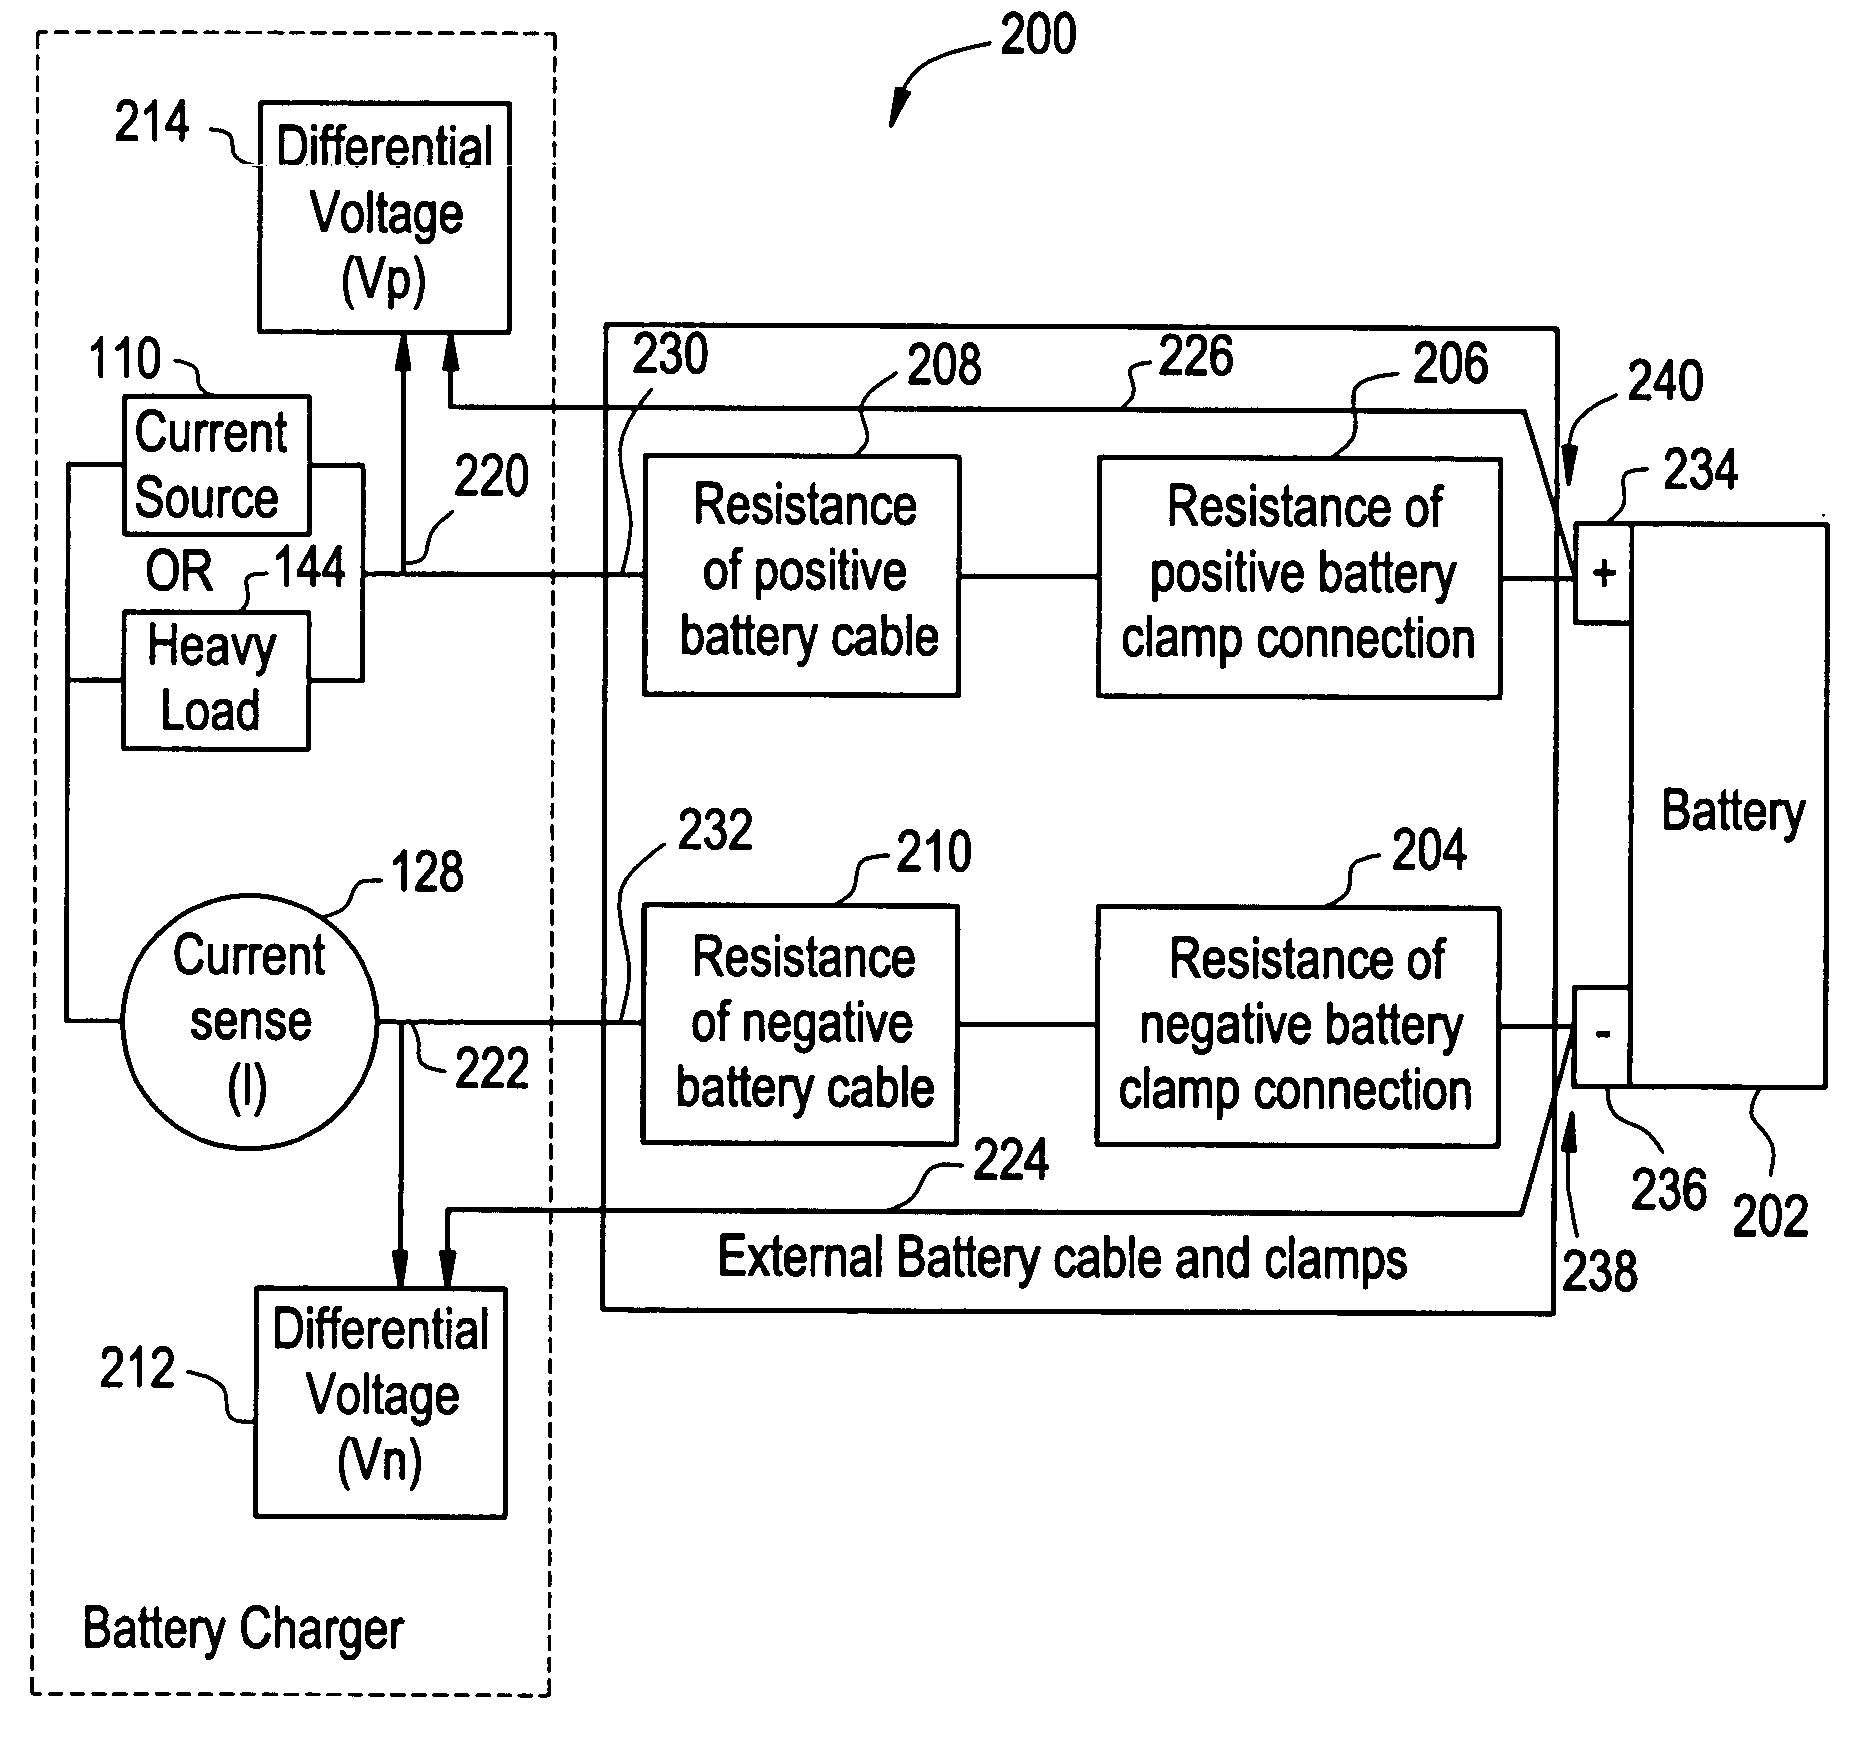 Apparatus and method for incorporating the use of a processing device into a battery charger and tester